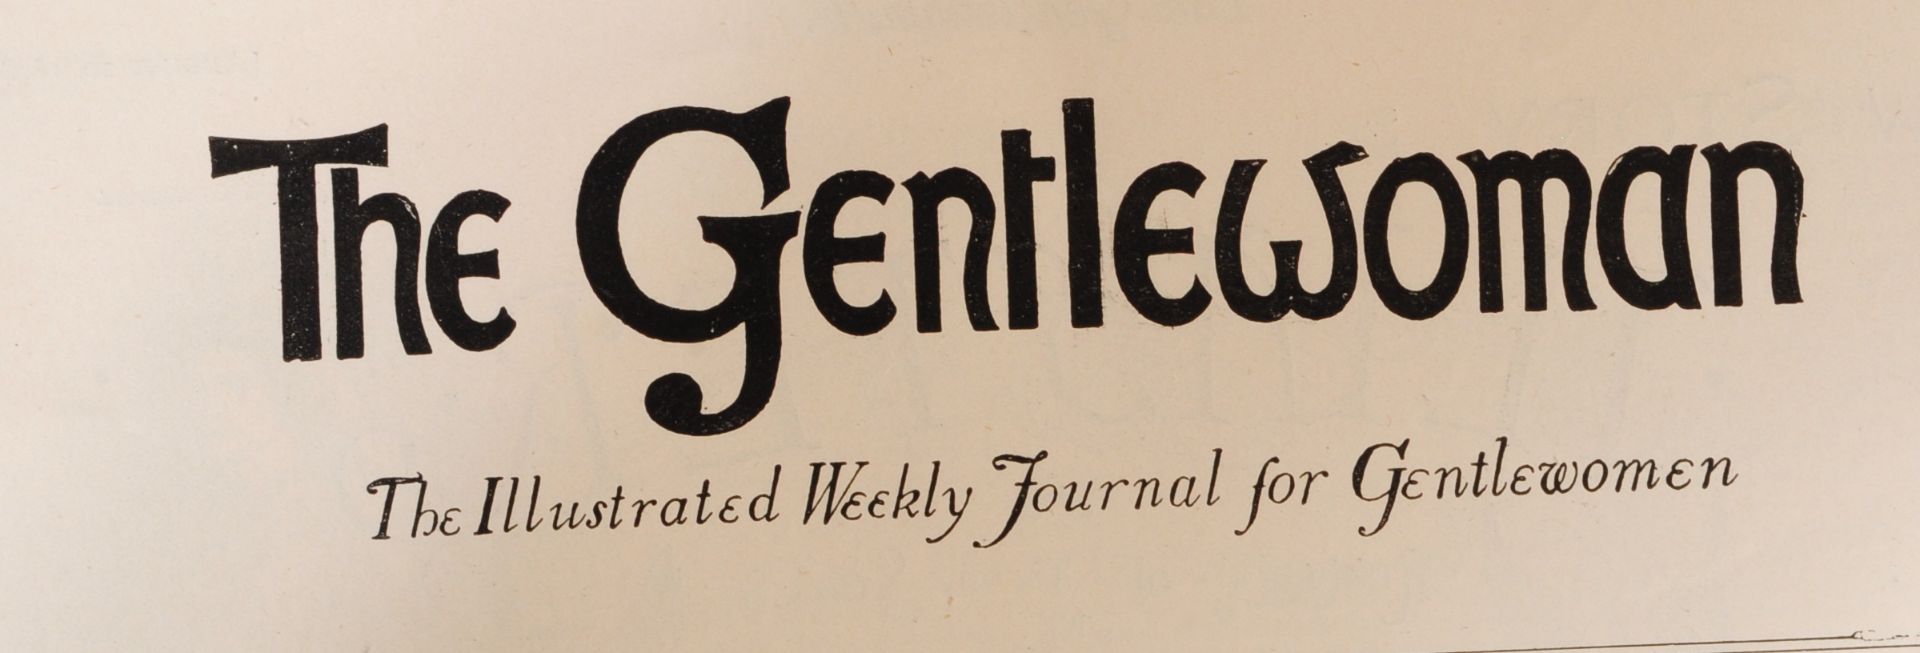 THE GENTLEWOMAN WEEKLY JOURNALS FROM THE 1890'S - Image 6 of 7